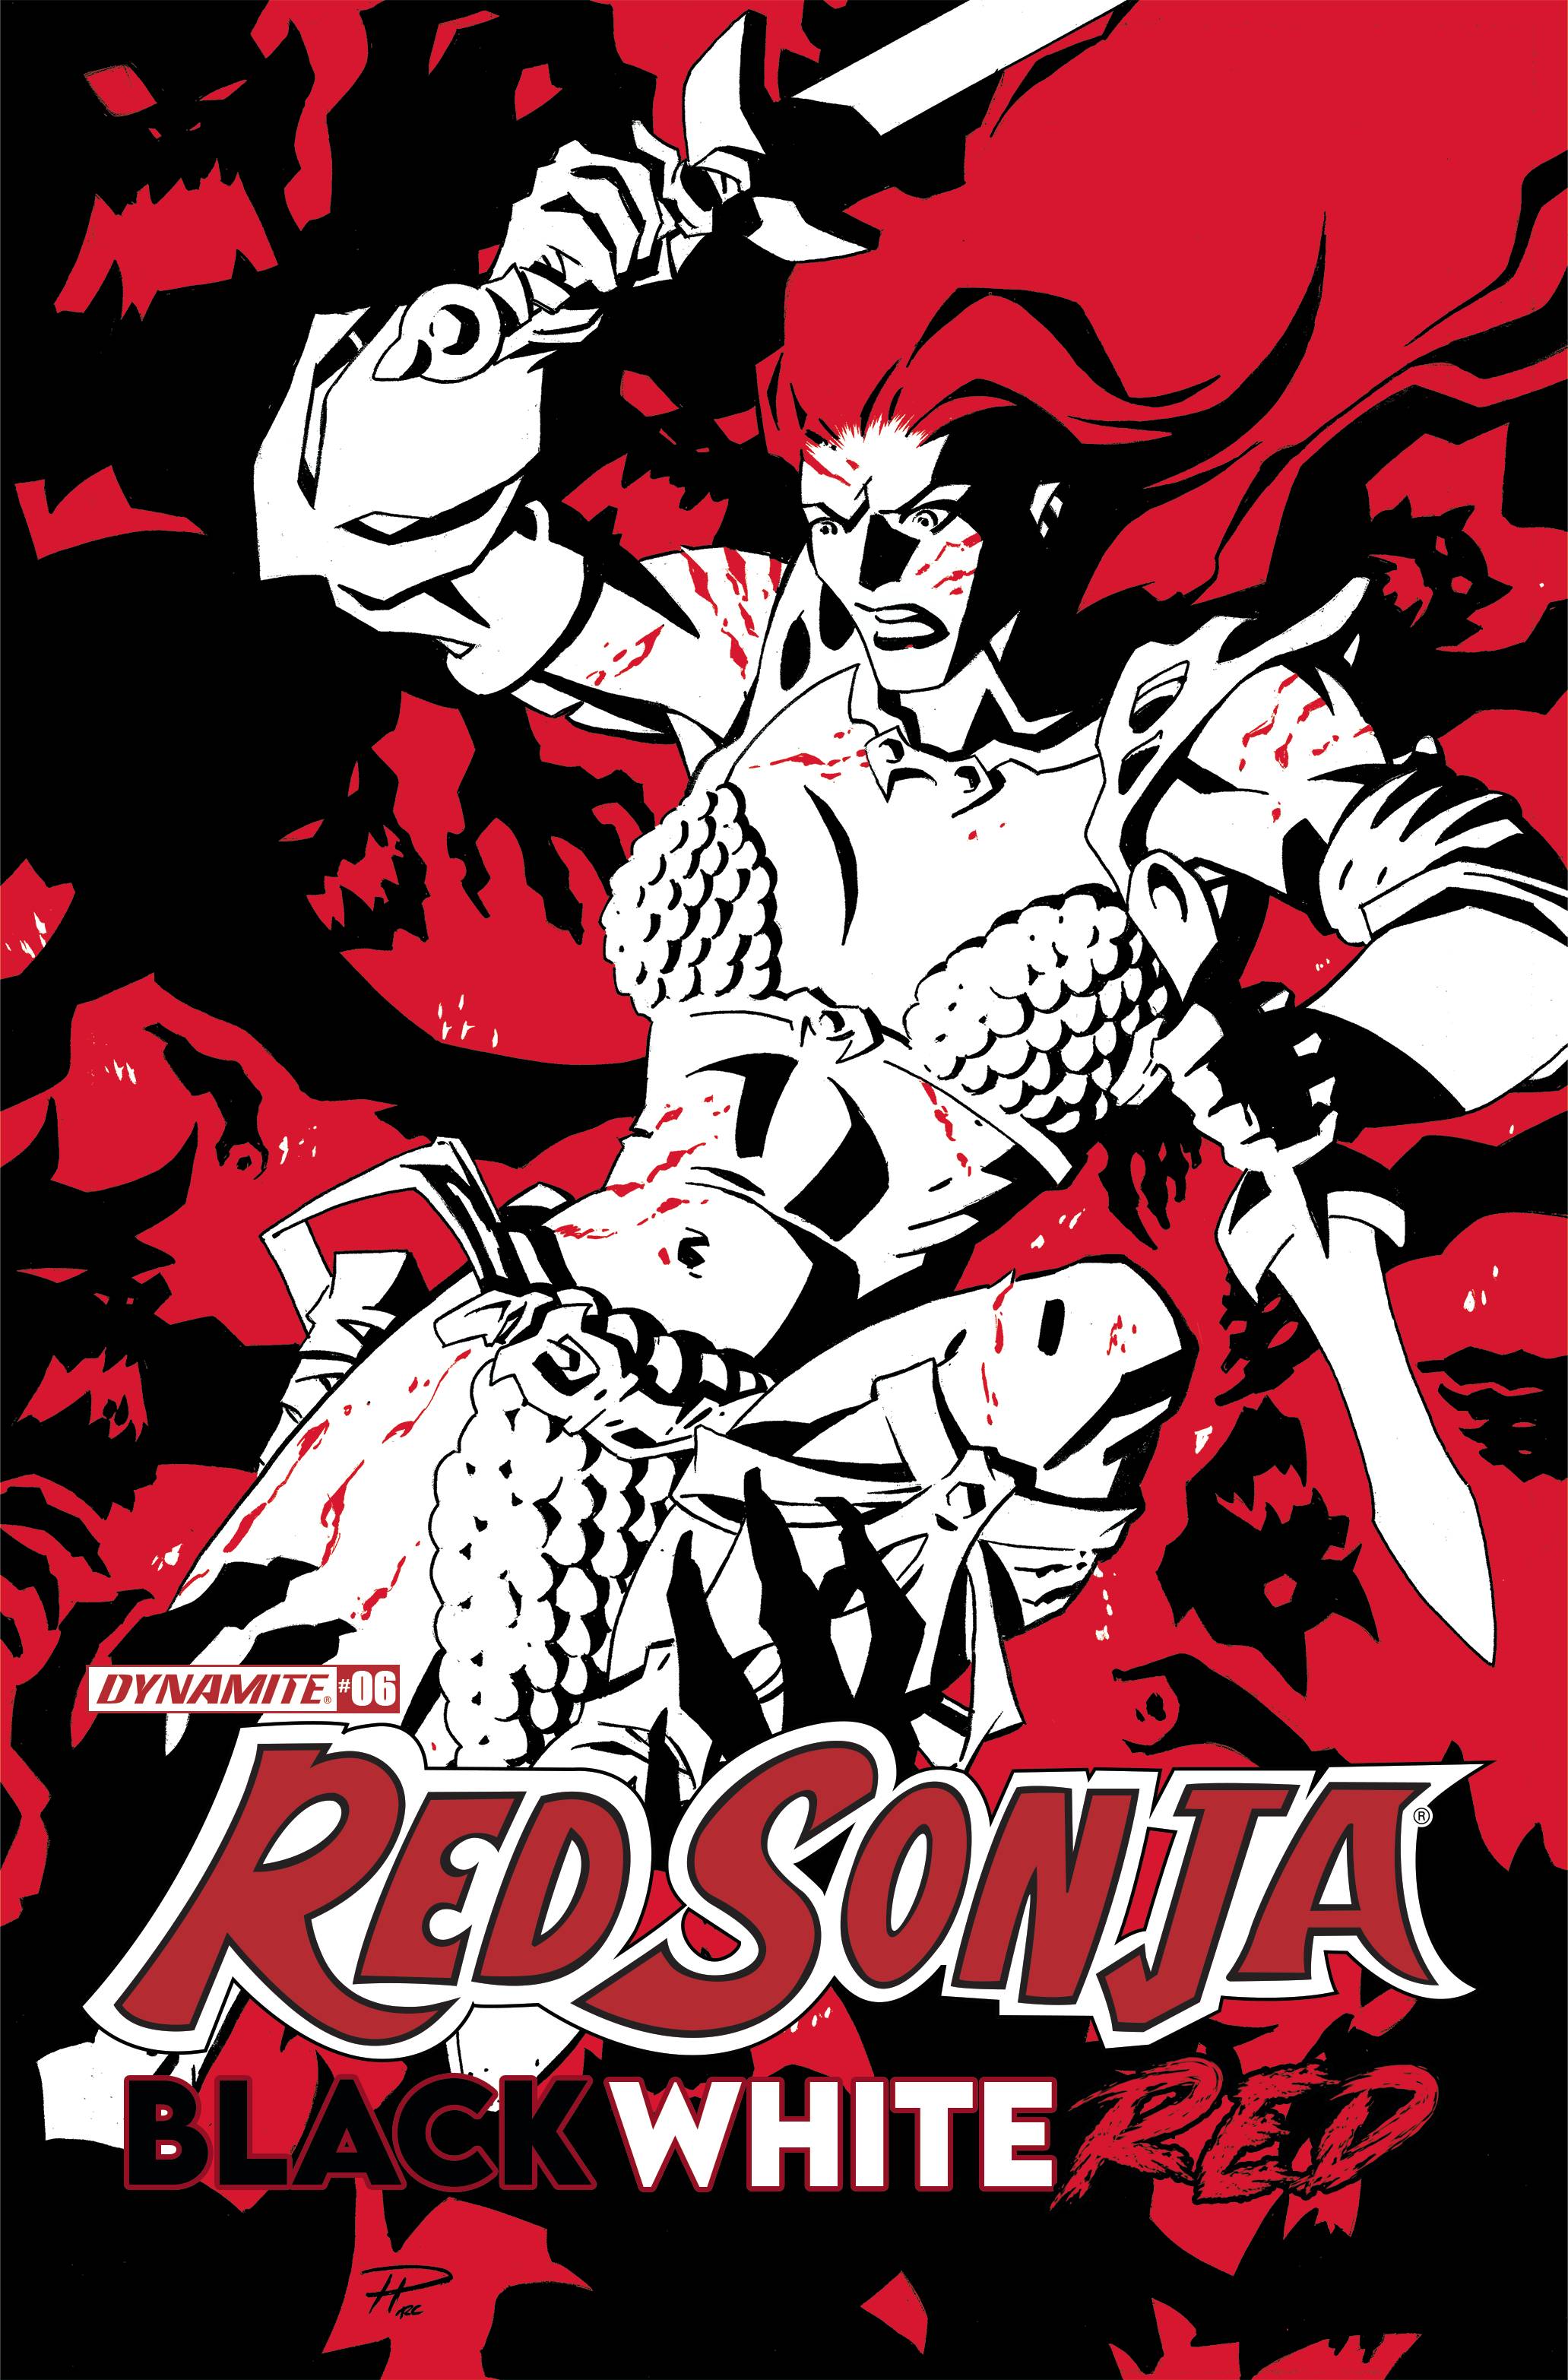 Red Sonja Black White Red #7 Cover A Hester